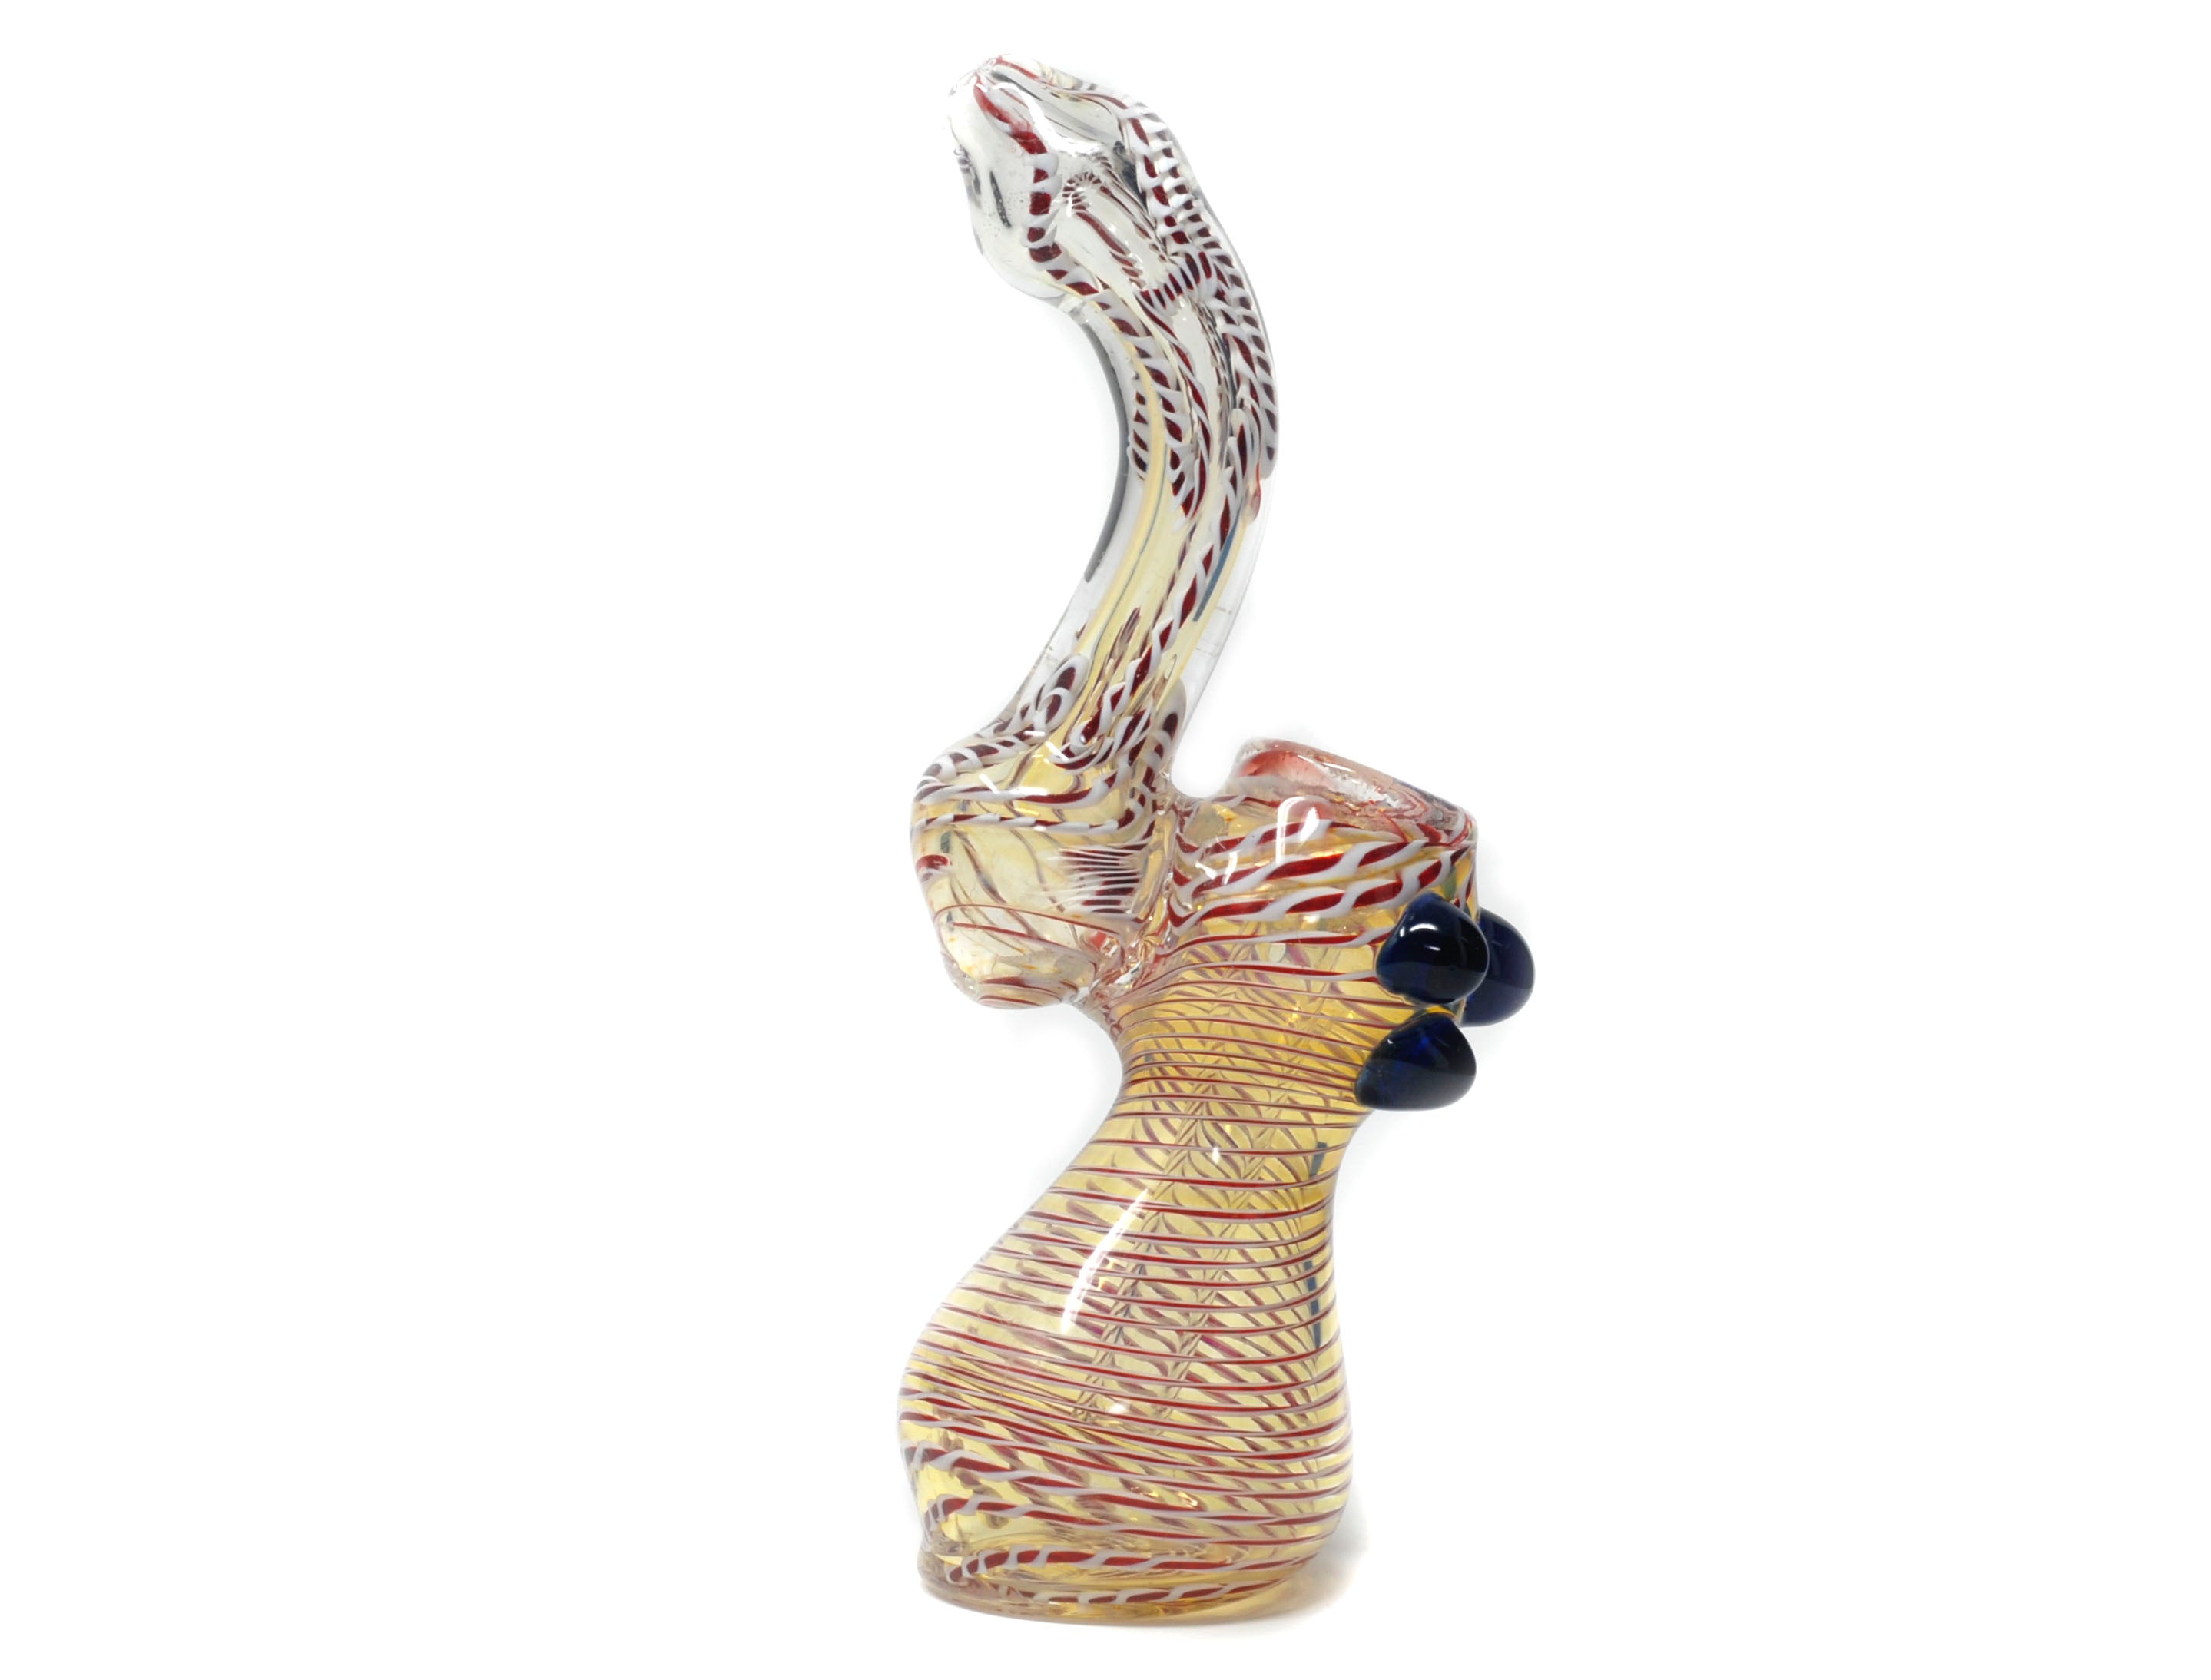 6" white and other arts medium glass bubbler pipe